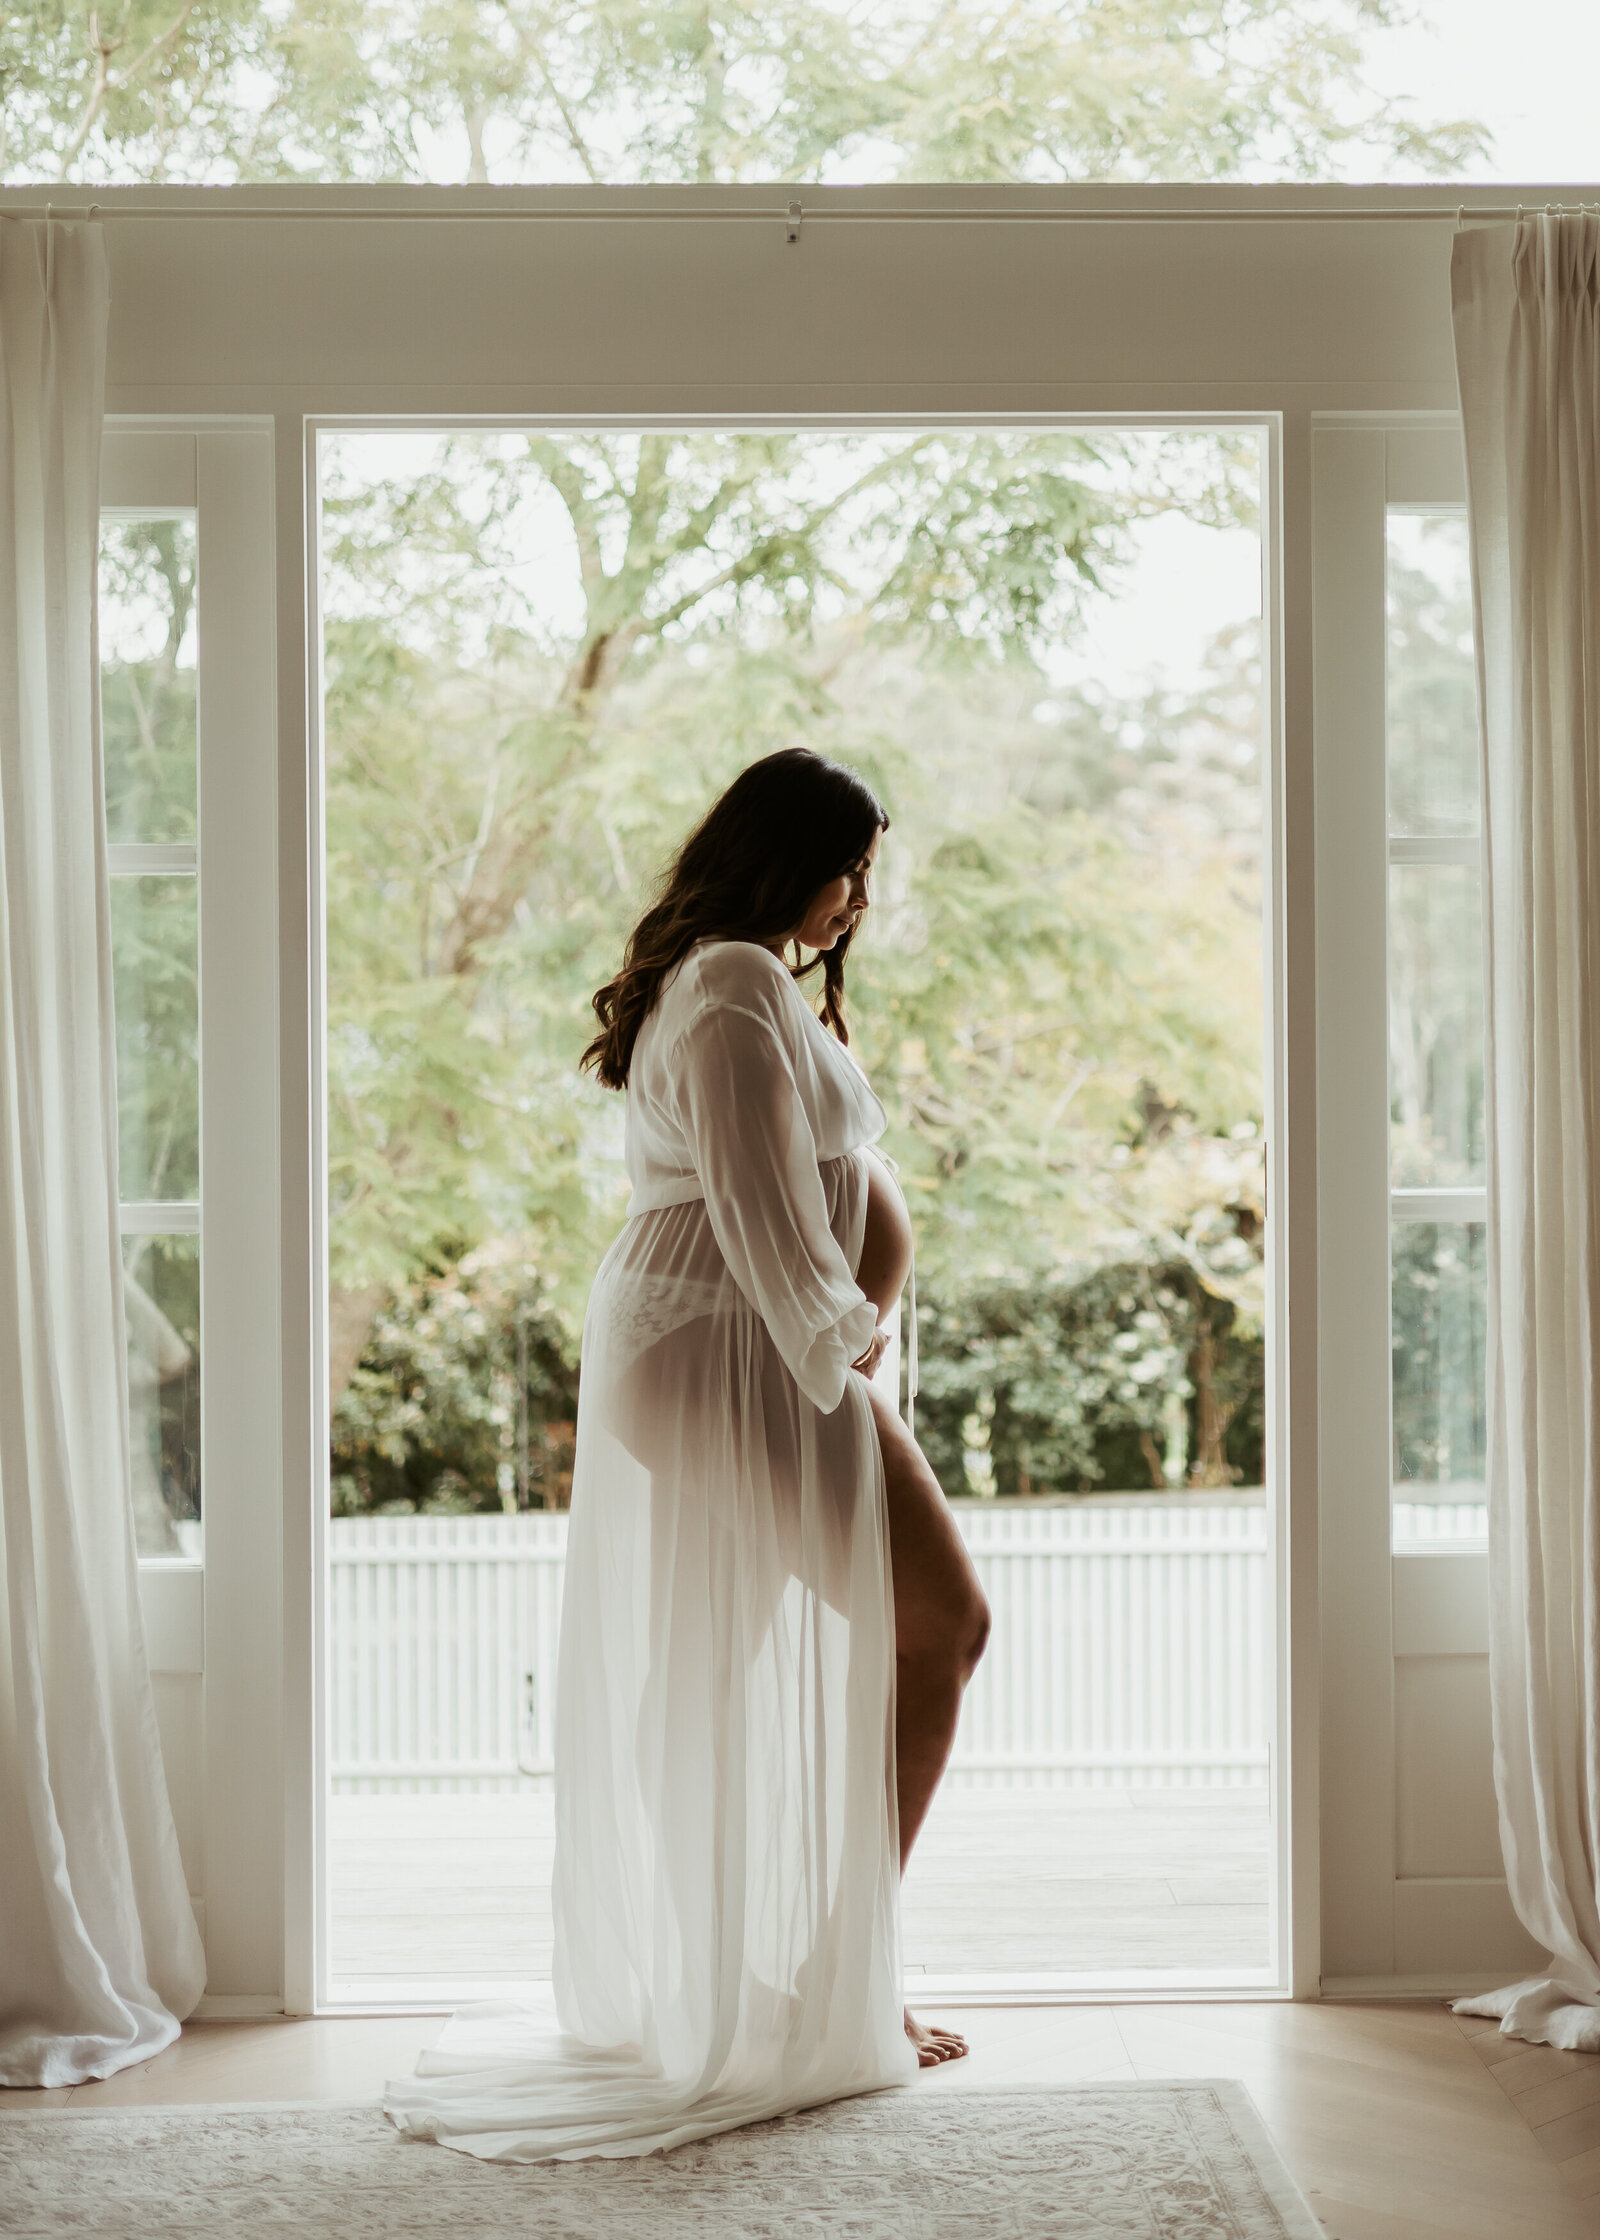 Mum-to-be posing in front of open white doorway in her underwear and robe showing off her baby bump.